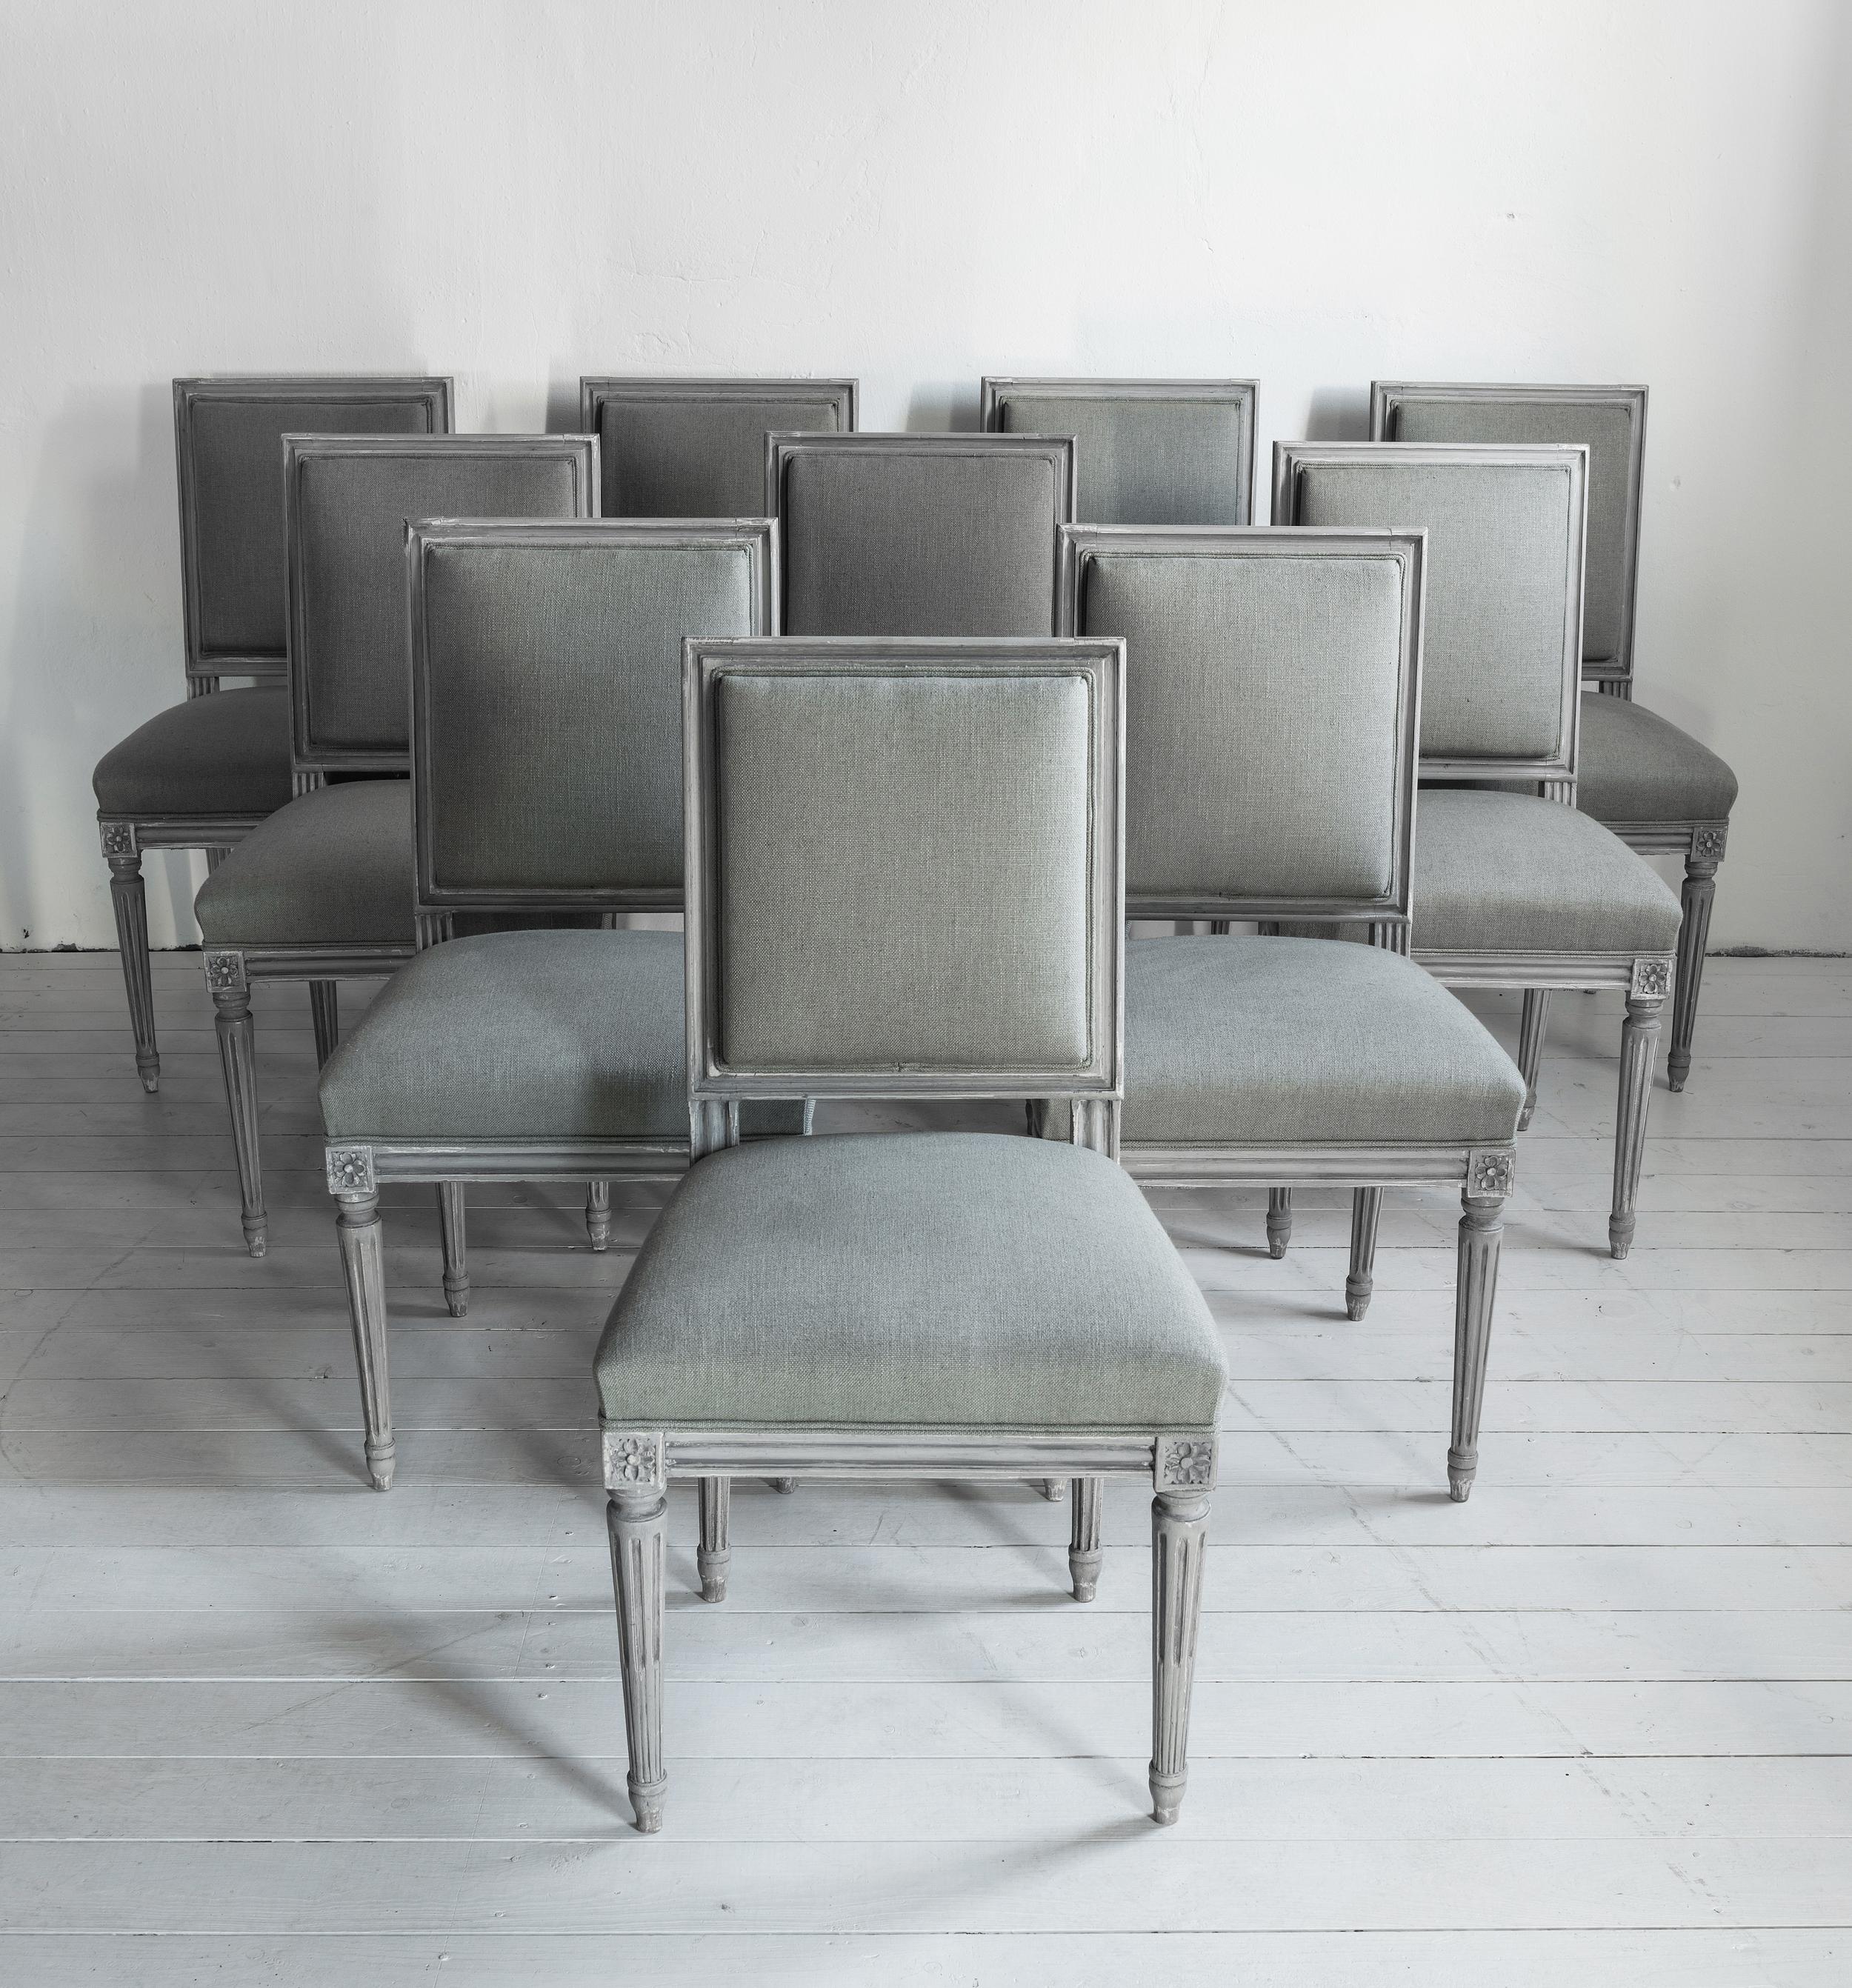 An elegant set of 8 + 2 dining chairs, having been completely stripped and reupholsterted using an mid grey linen blend fabric. Very elegant Louis XVI form. Two chairs are just slightly different, hardly noticeable. We would place these as carvers.